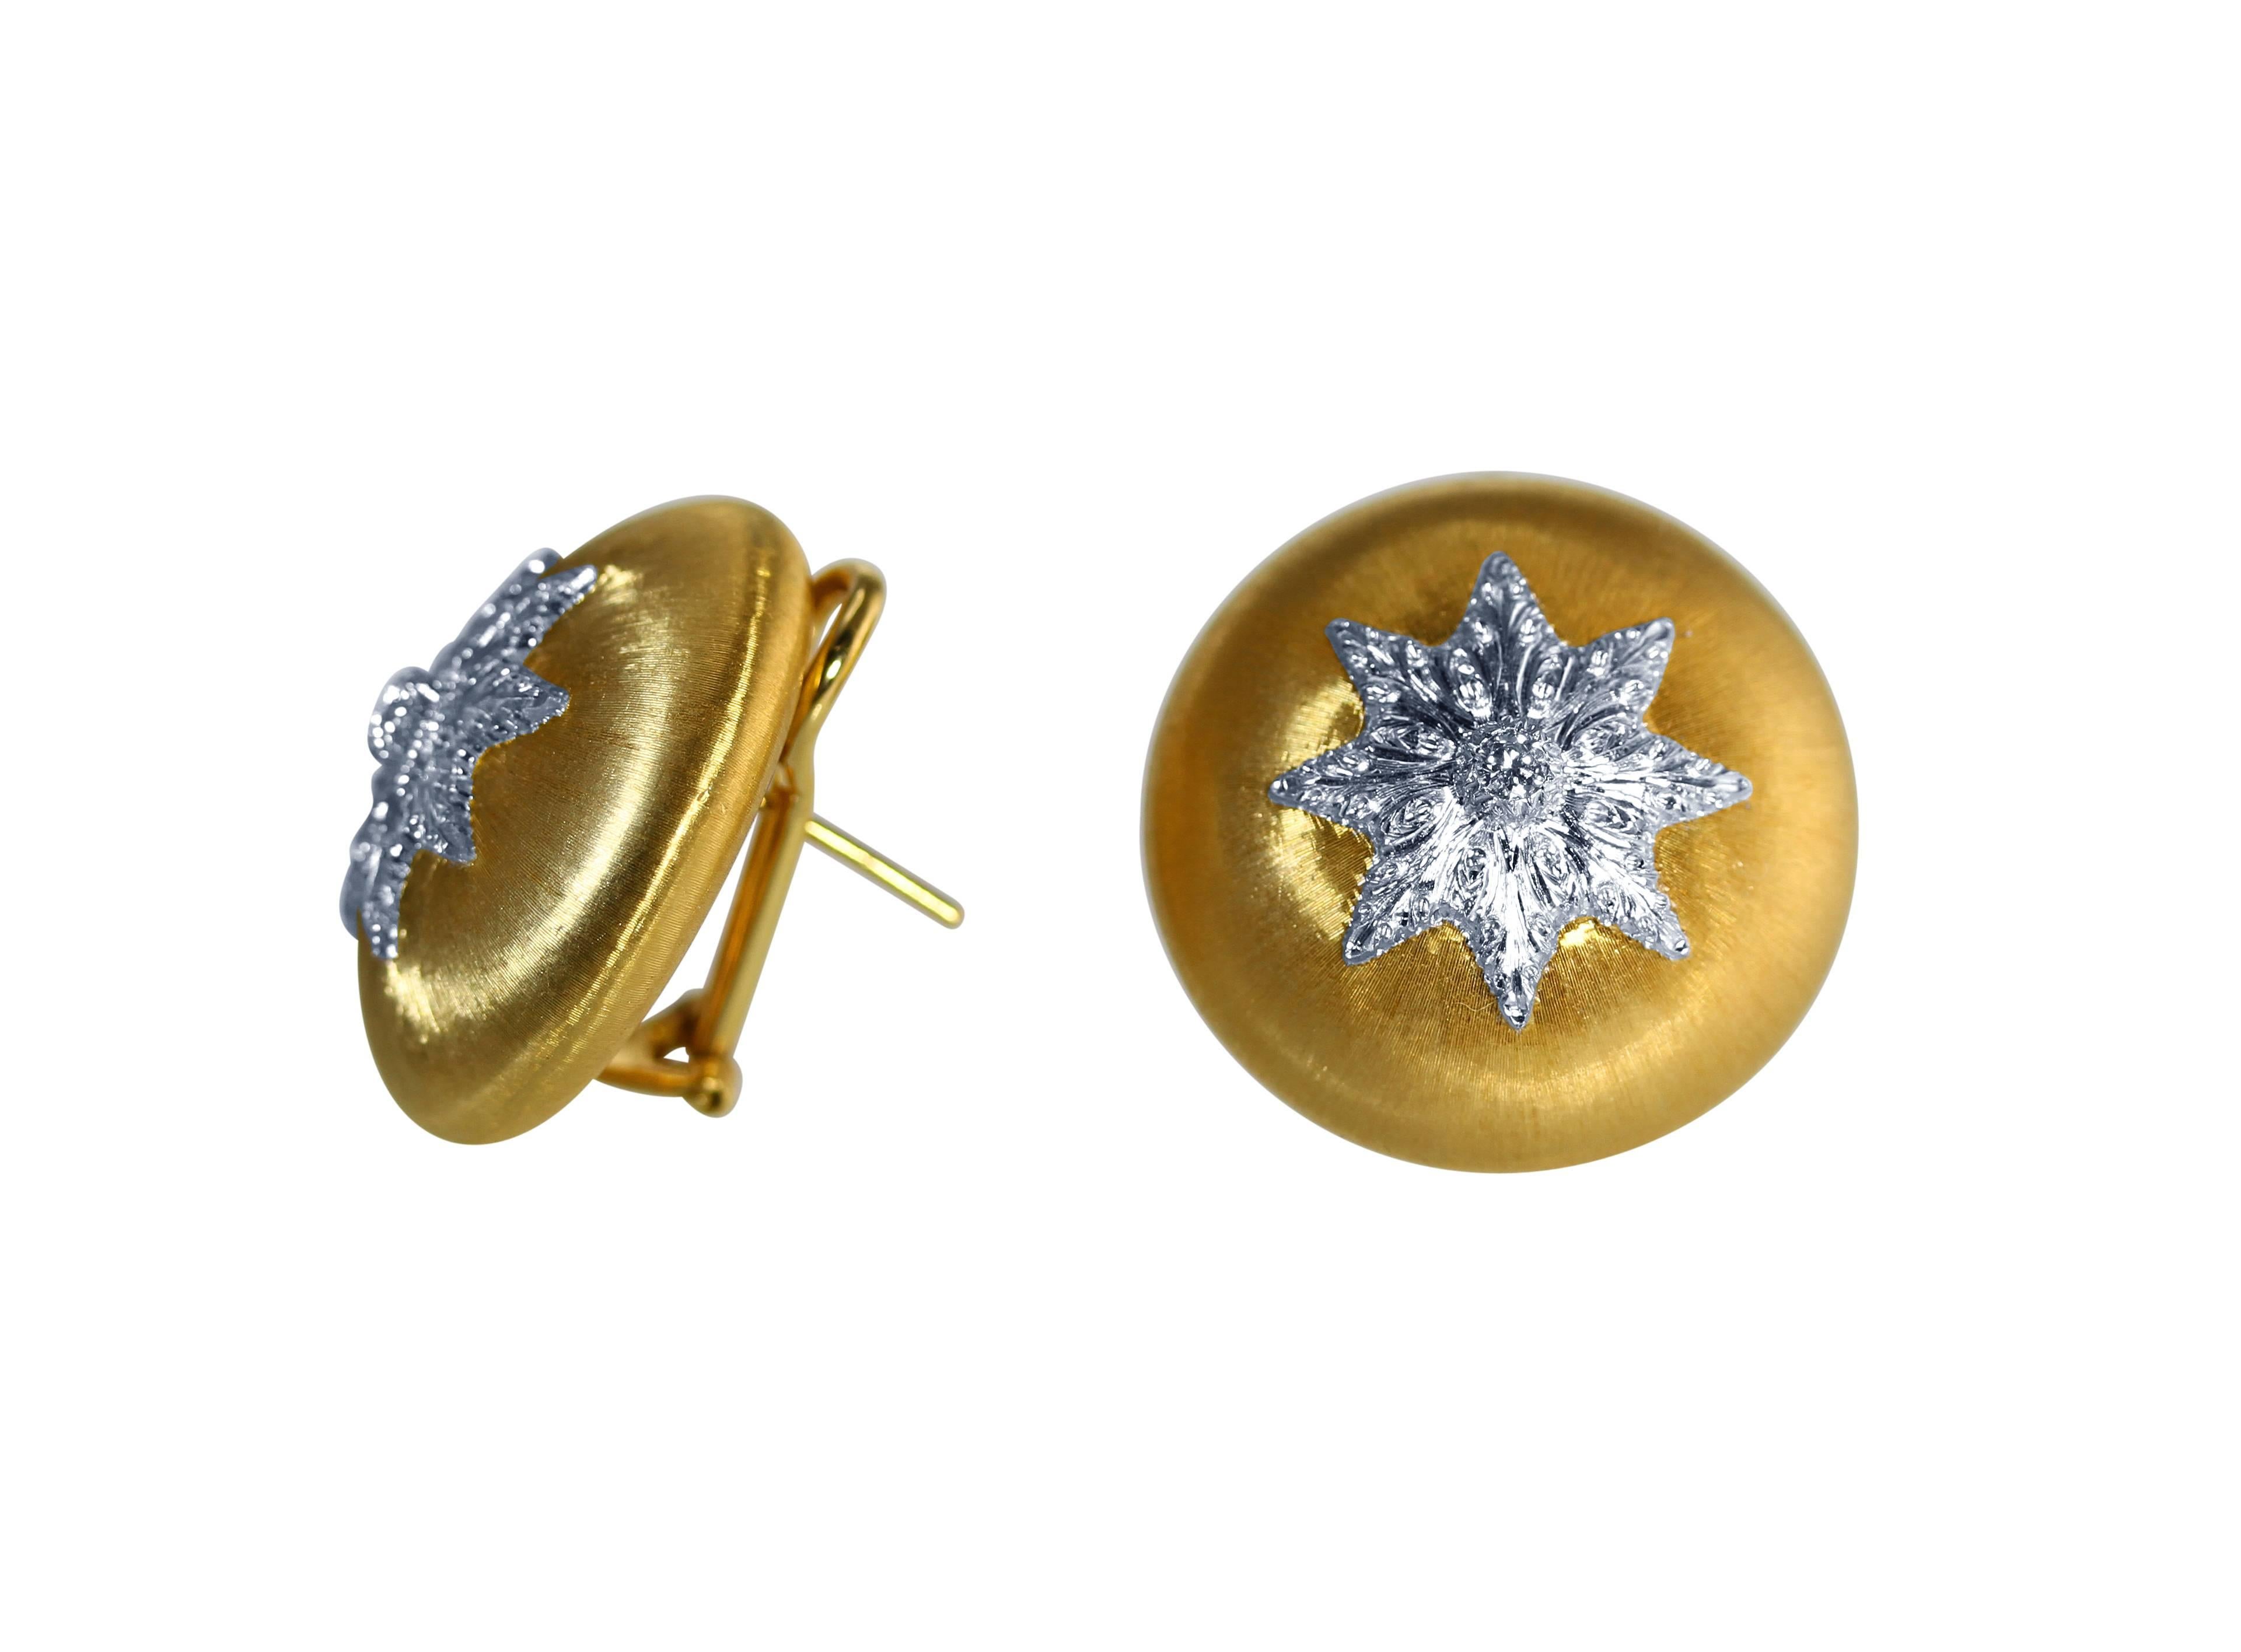 A pair of 18 karat white and yellow gold and diamond earclips by Buccellati, Italy, designed as a bombe buttons centering a white gold motif, accented by 2 round diamonds weighing approximately 0.15 carat, gross weight 23.0 grams, measuring 1 by 1